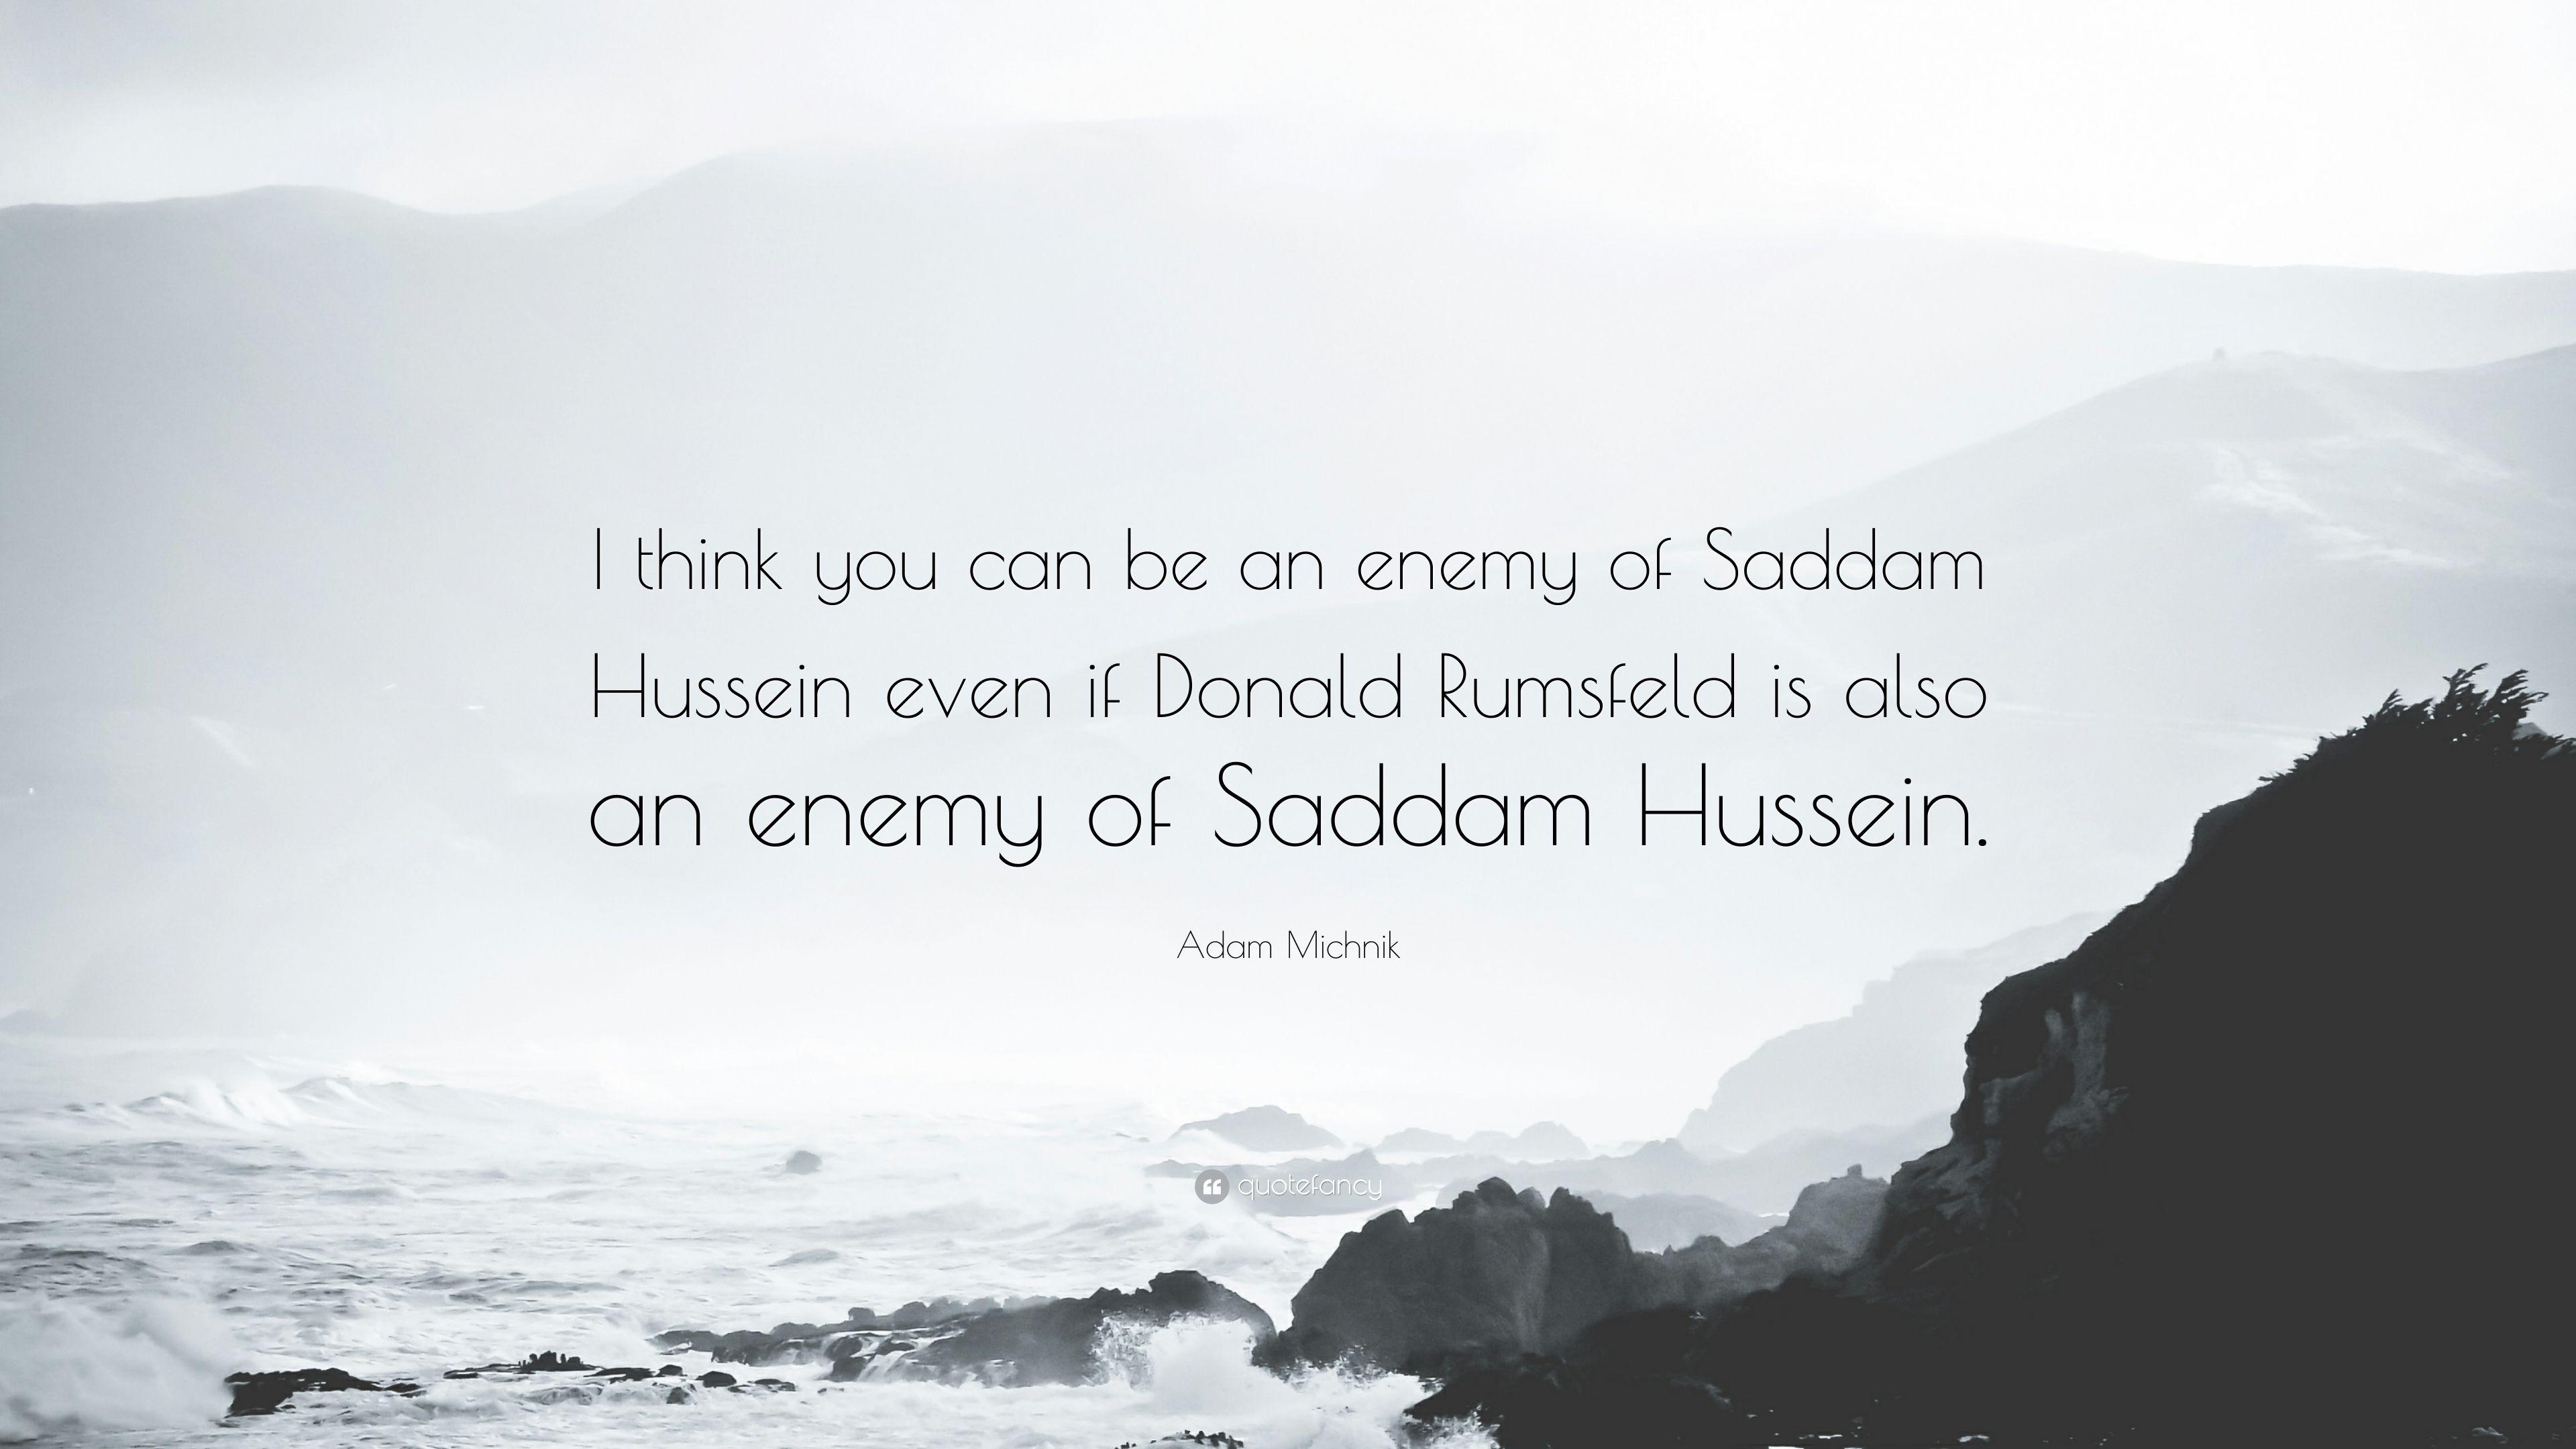 Adam Michnik Quote: “I think you can be an enemy of Saddam Hussein